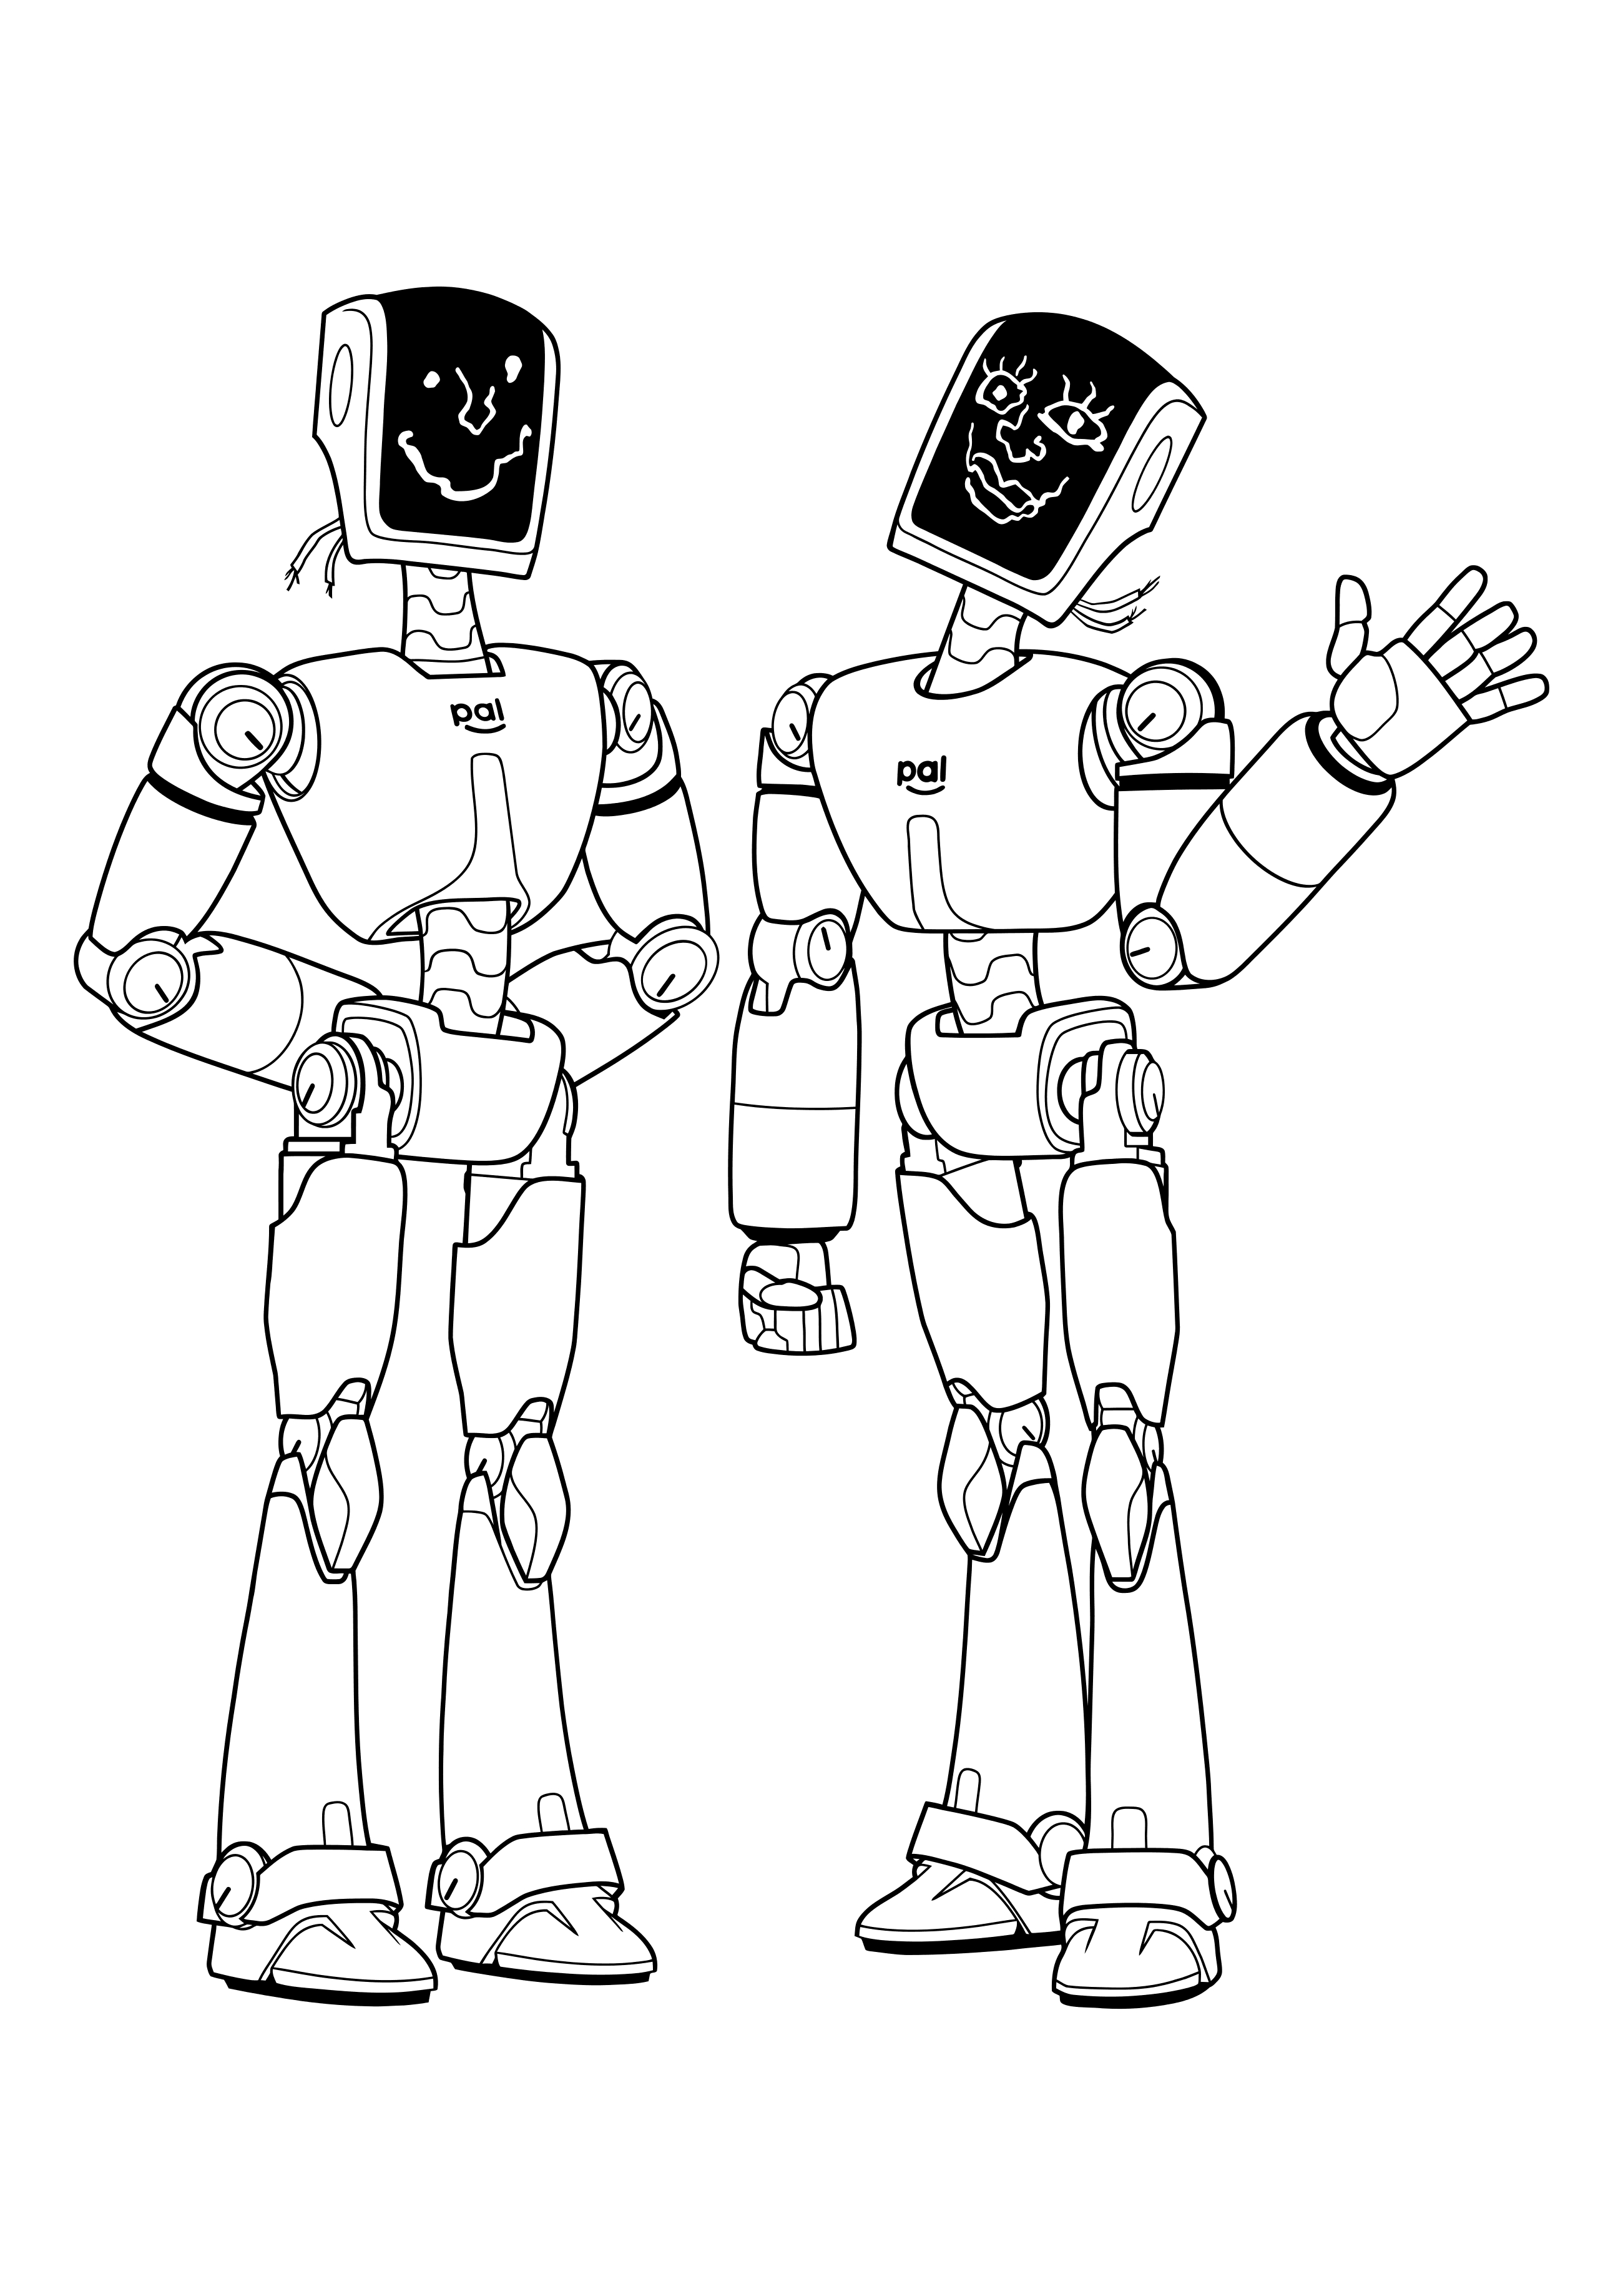 Coloring page The Mitchells vs the Machines Eric and Deborah